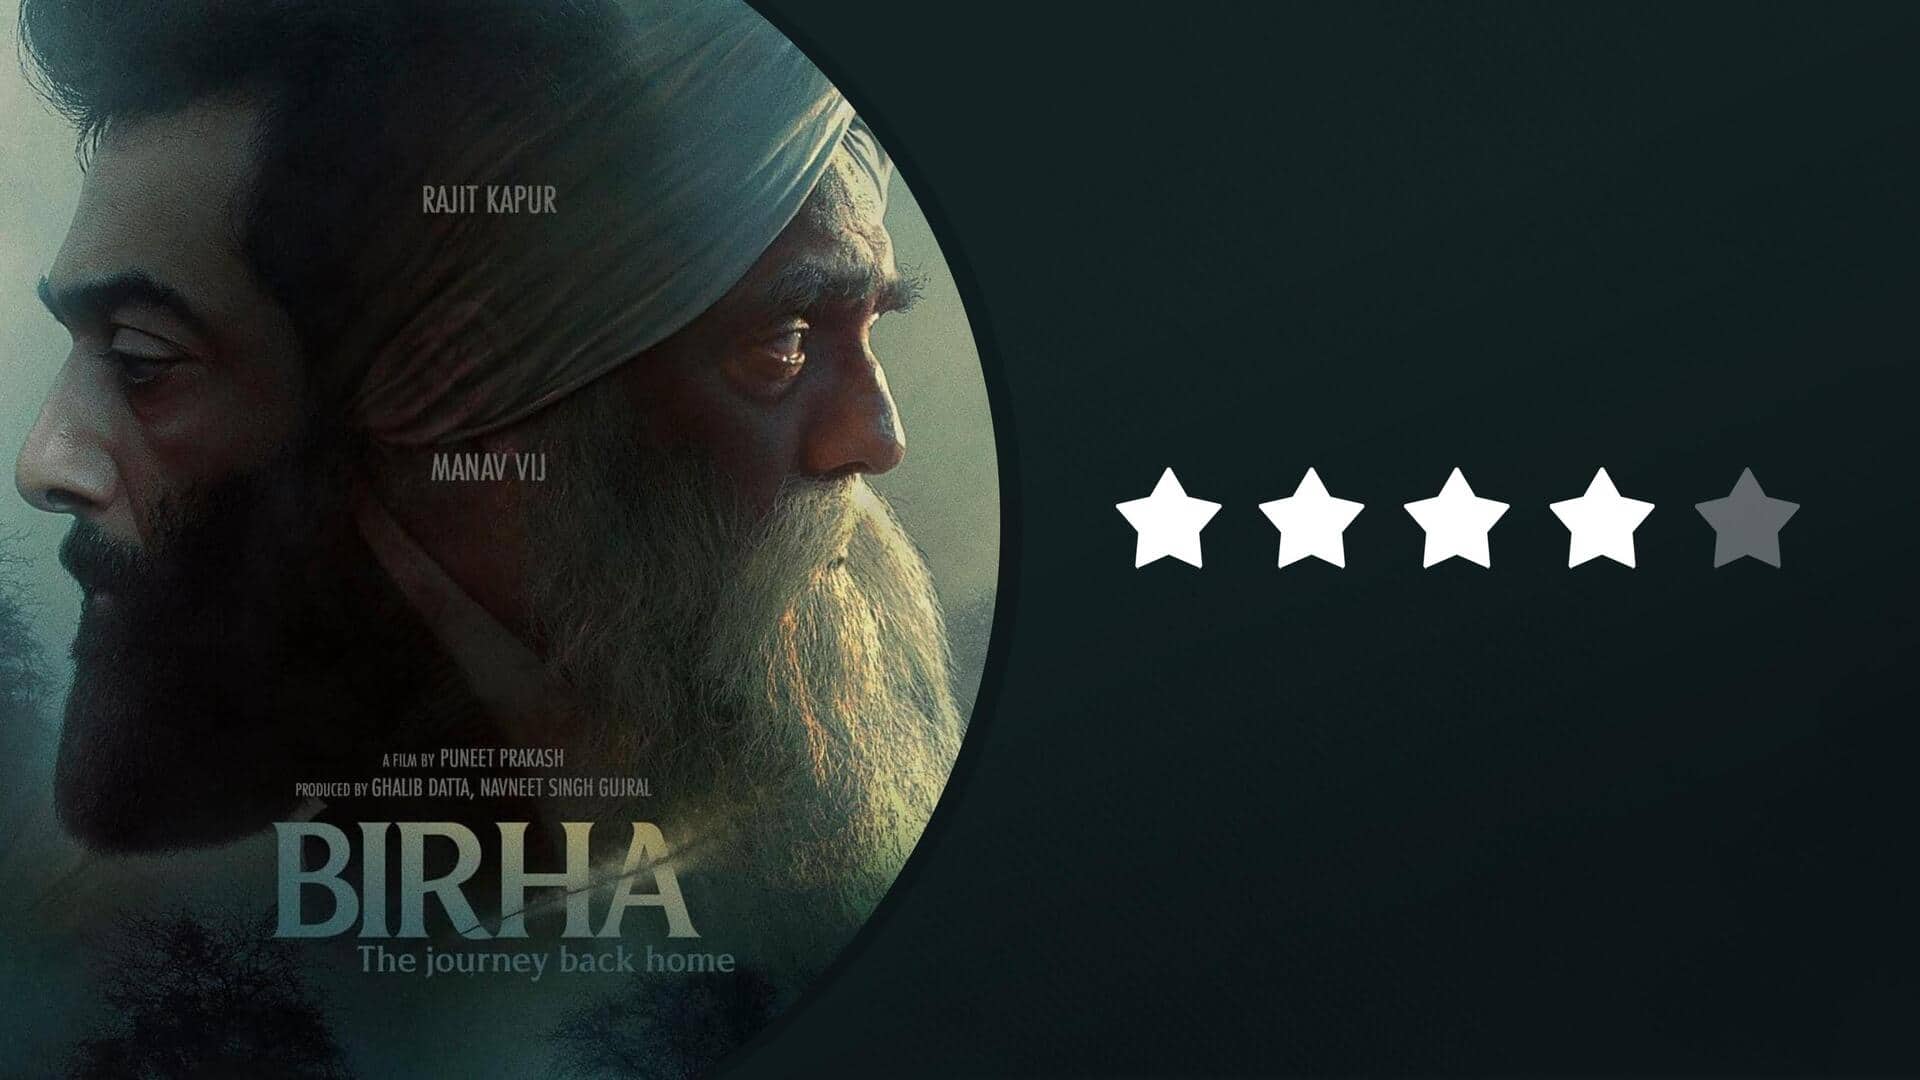 'Birha' review: Man's futile search for home and identity